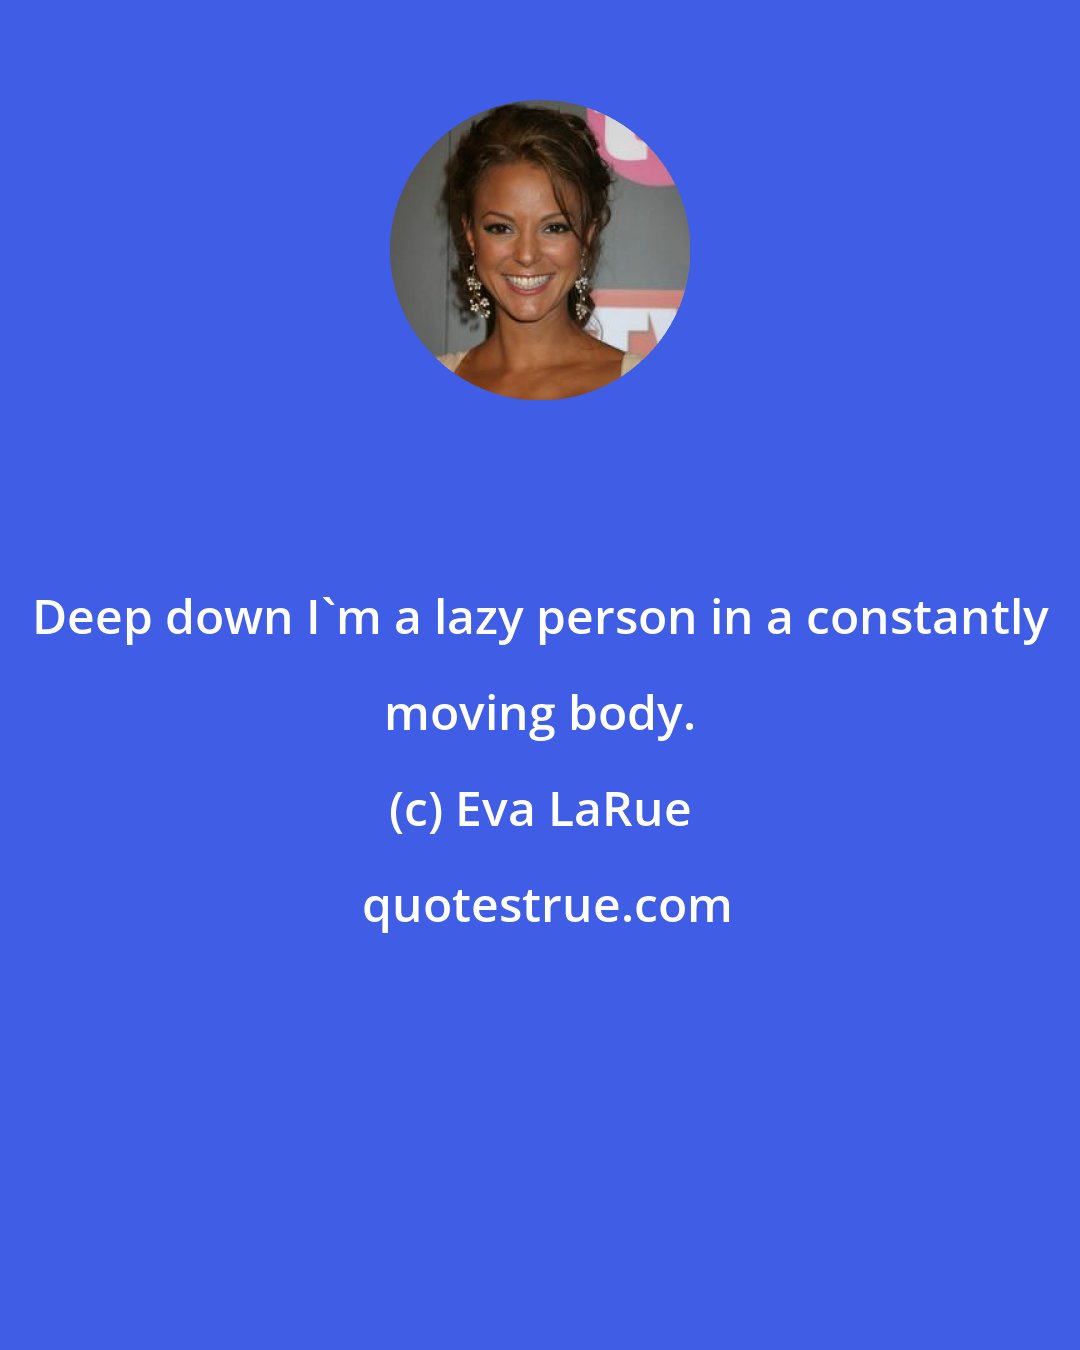 Eva LaRue: Deep down I'm a lazy person in a constantly moving body.